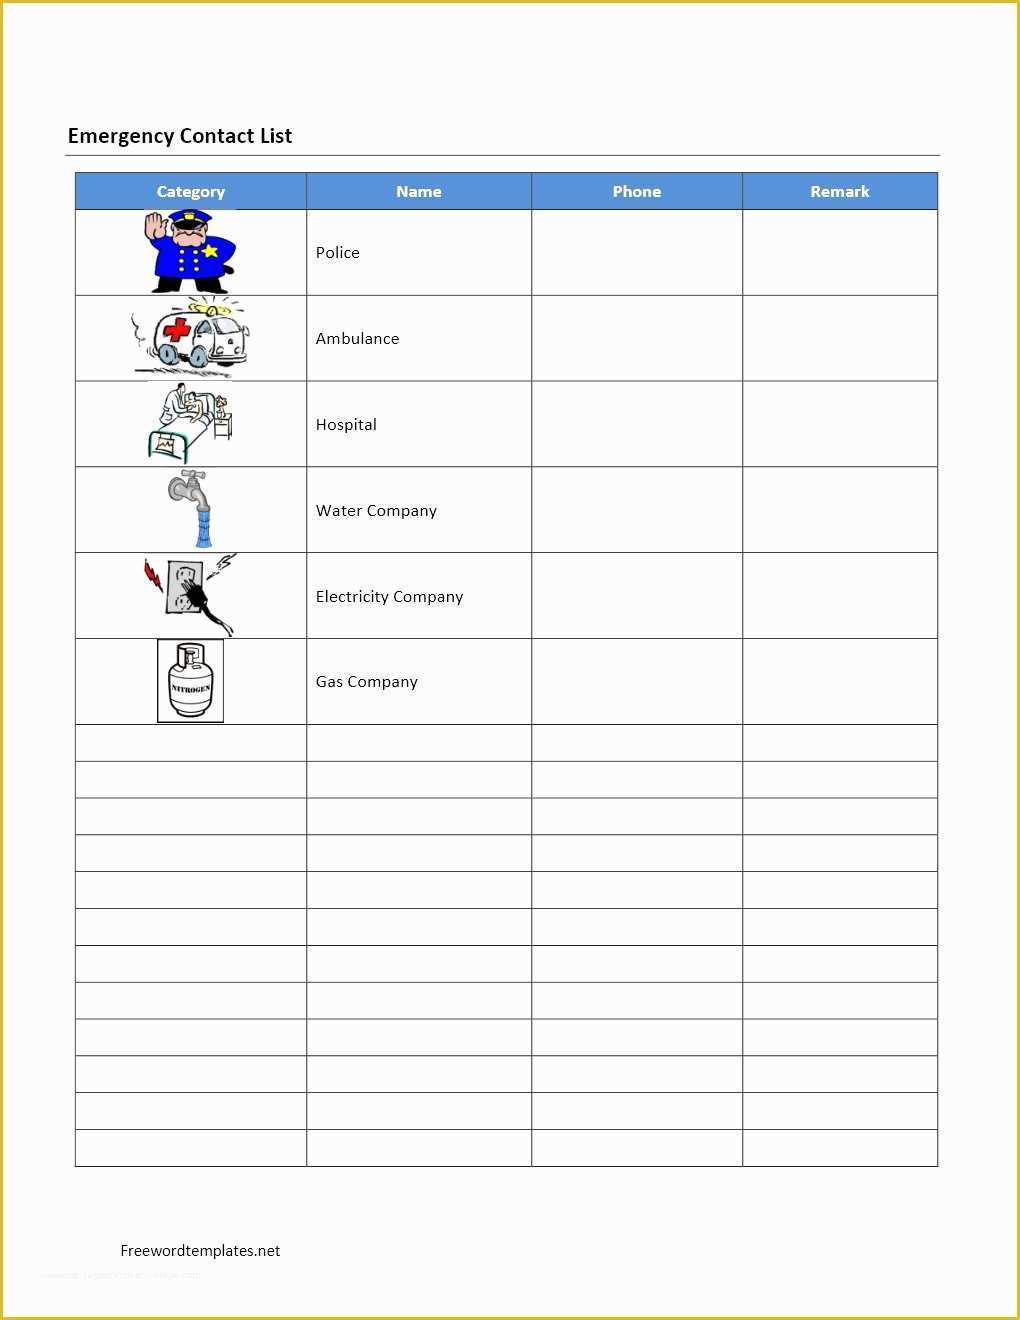 Call List Template Free Of Emergency Contact List